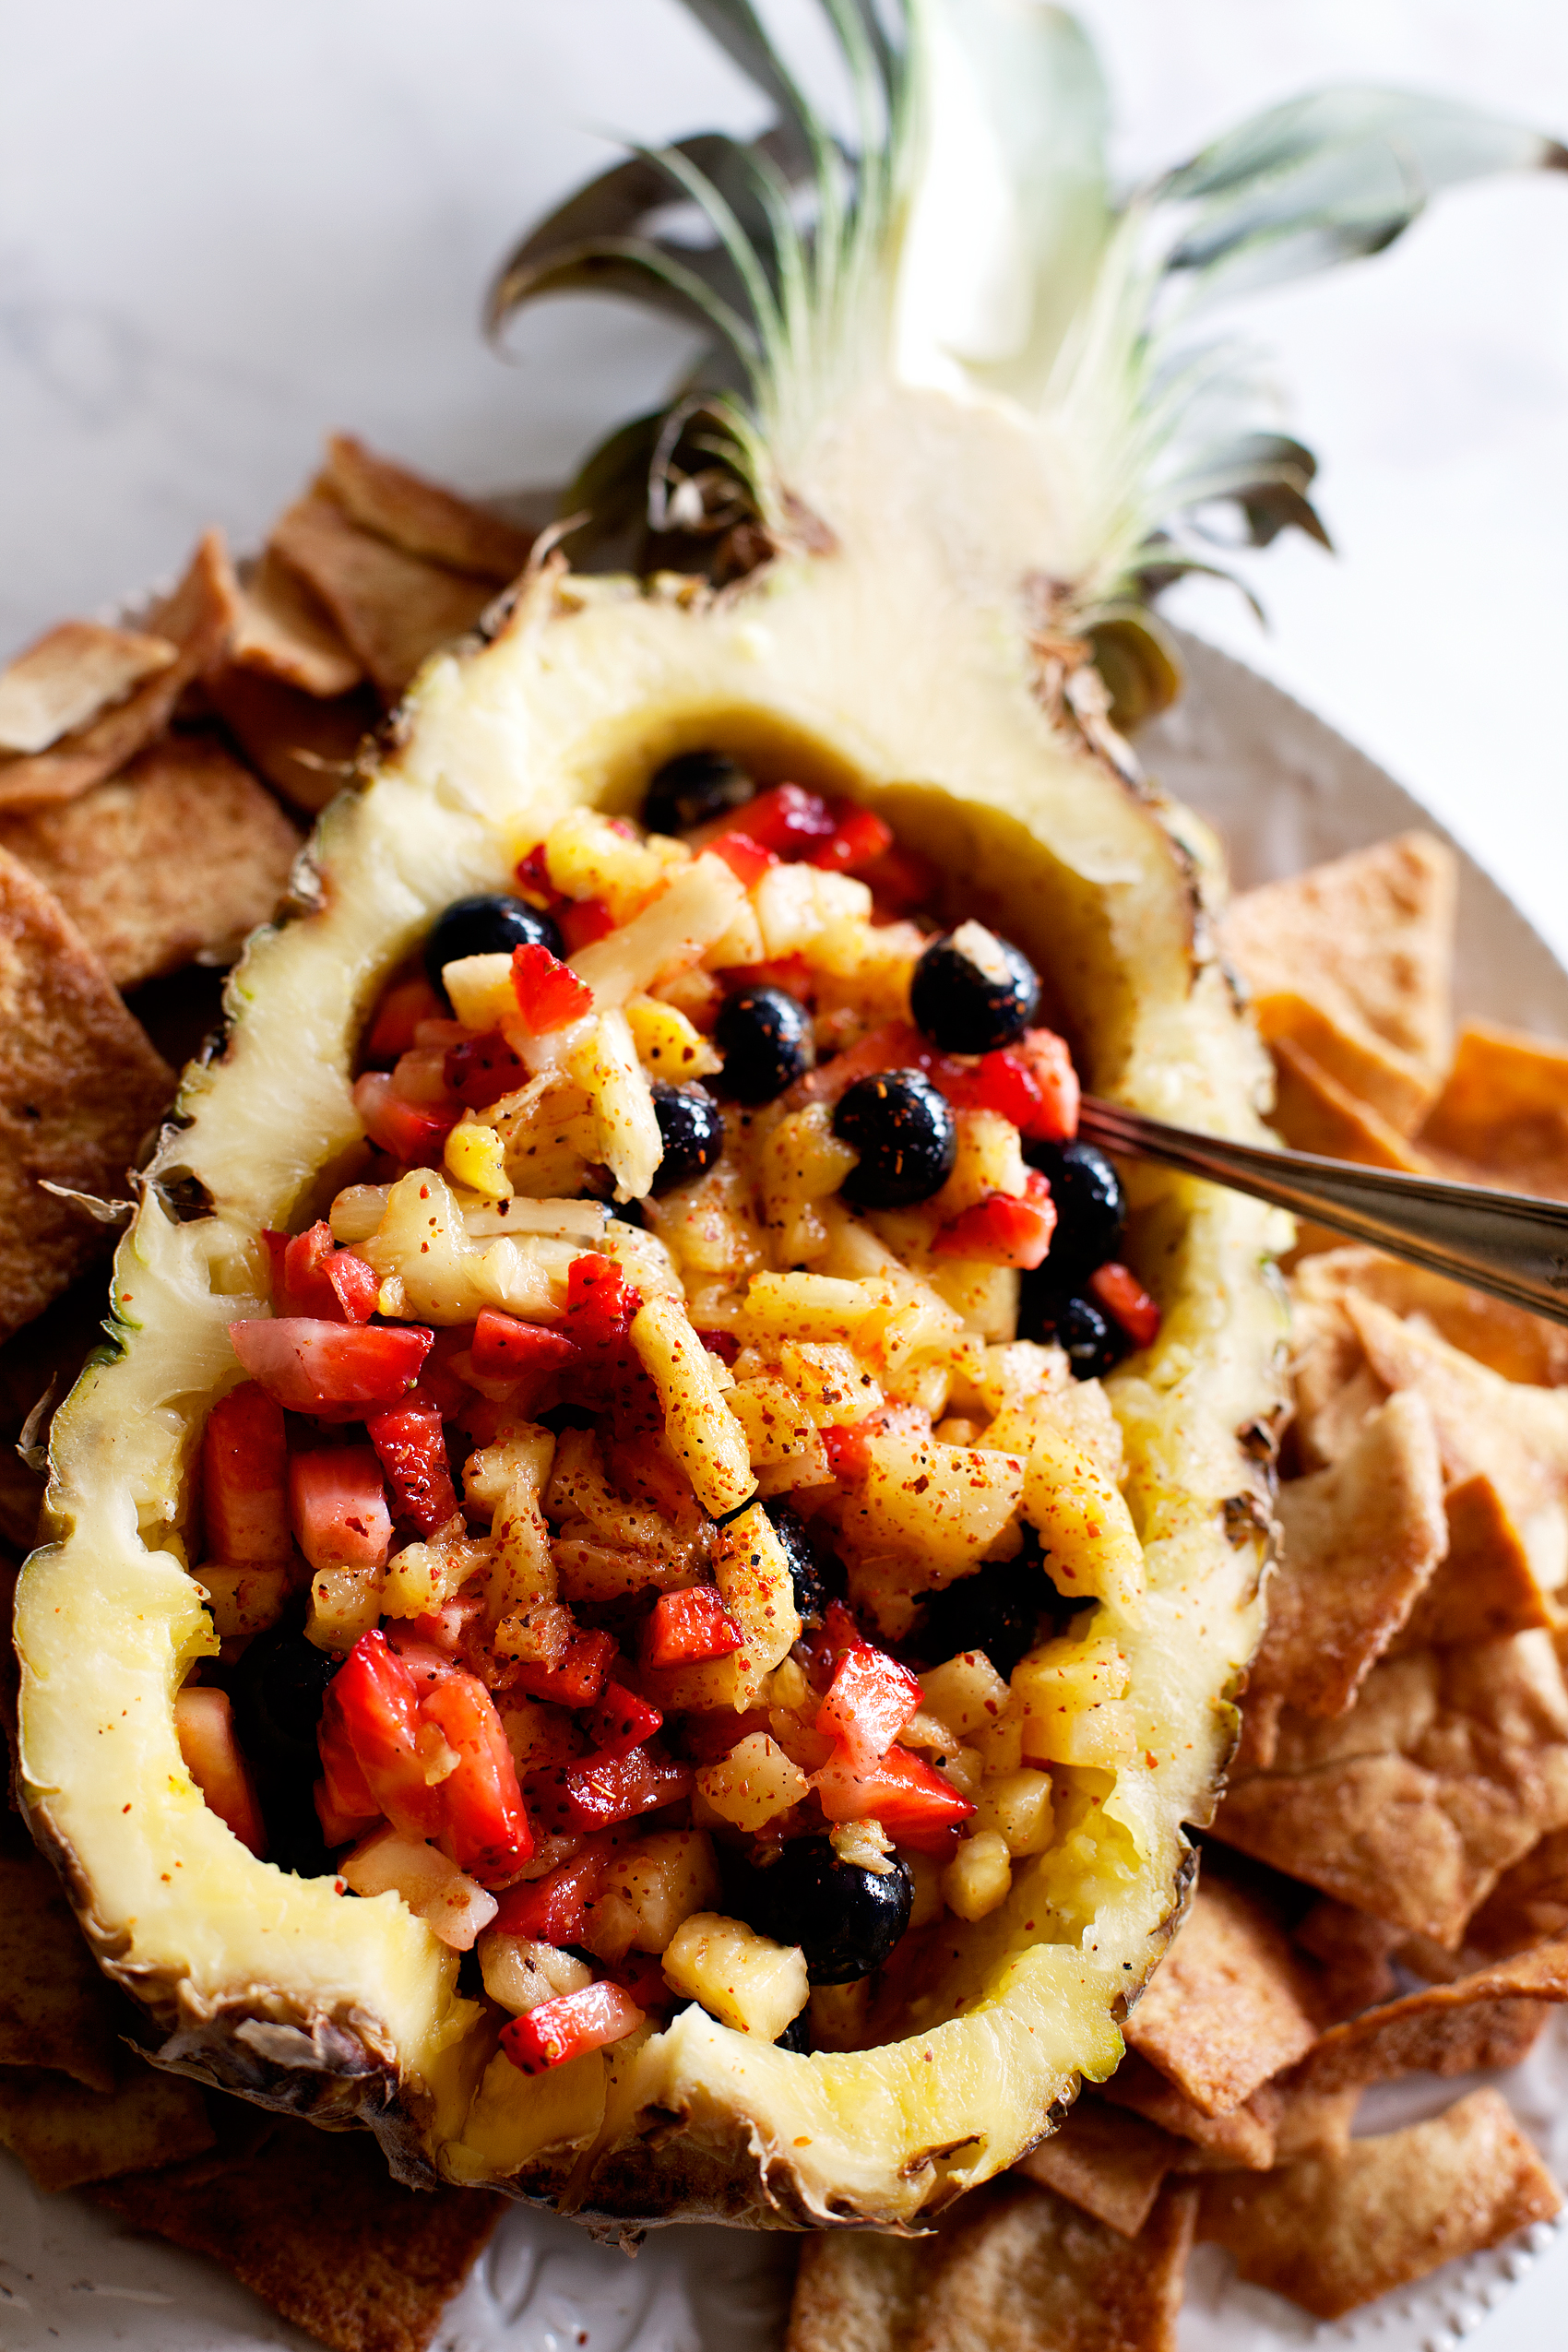 Pineapple Salsa, perfect treat for any summer party. Come on over to WhipperBerry to learn how to make it.